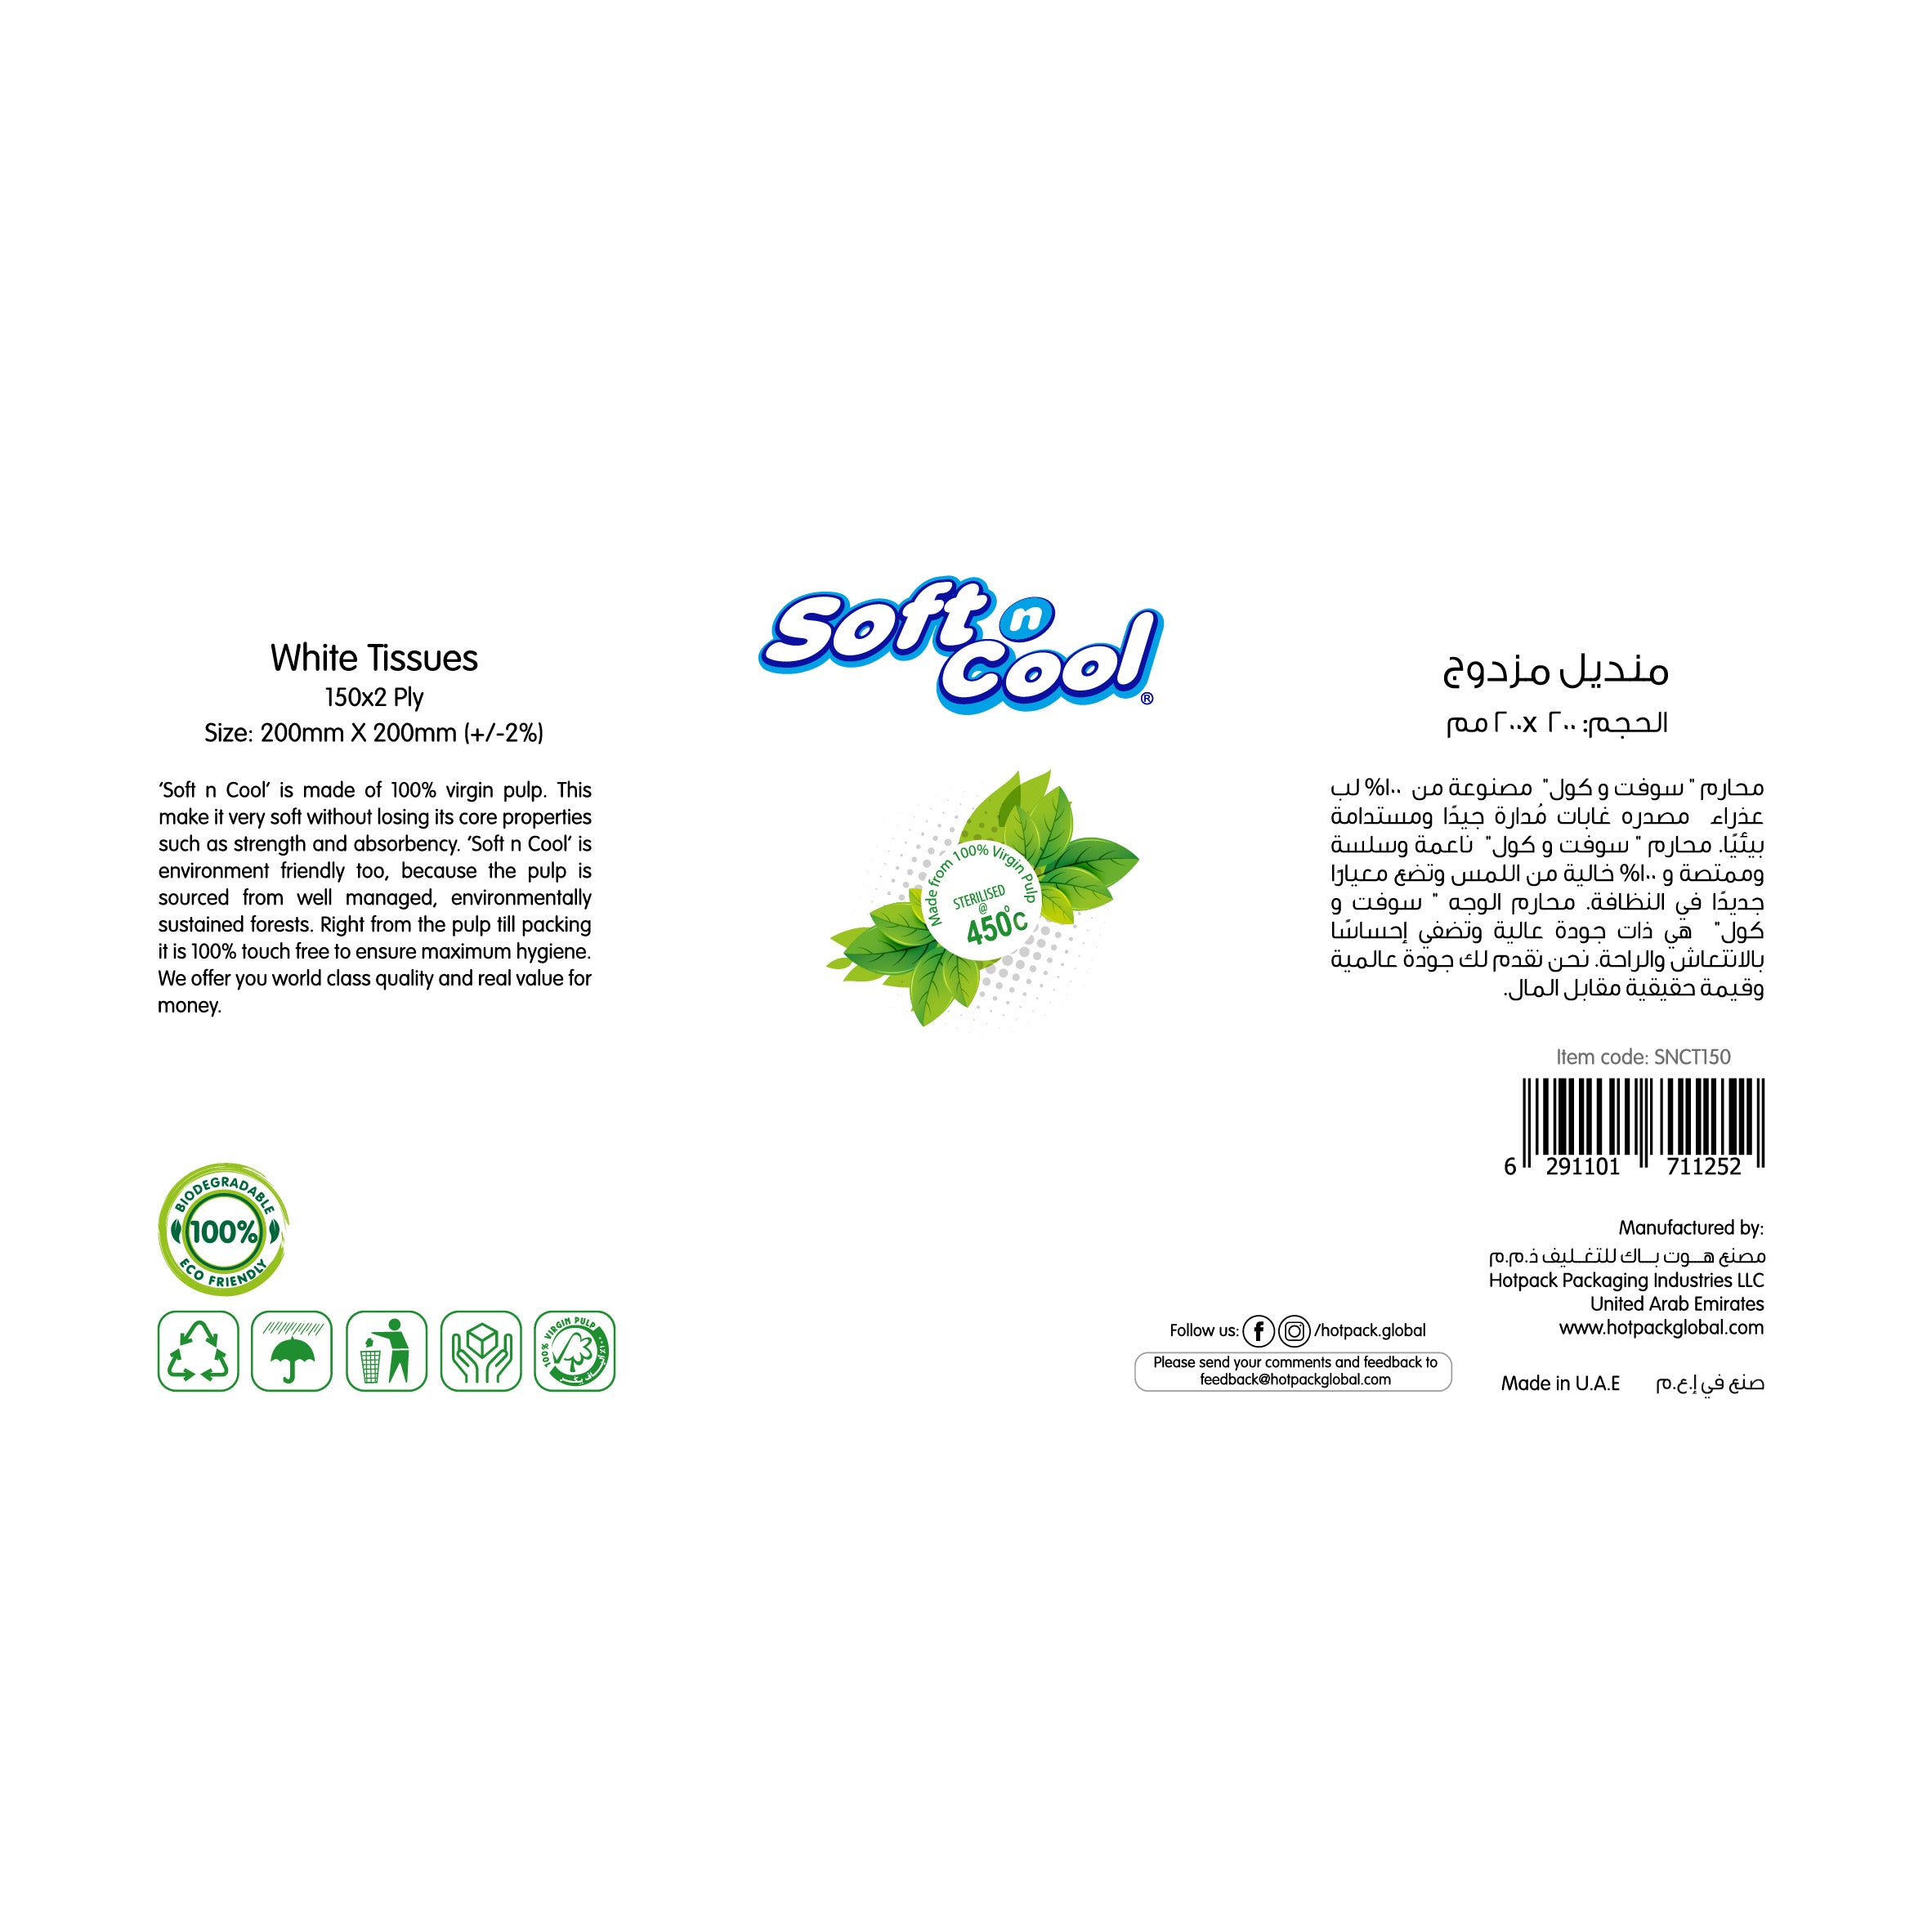 Soft n Cool Facial Tissue 150 Sheets x 2 Ply Wholesale Offer Pack 36 Boxes - Hotpack UAE